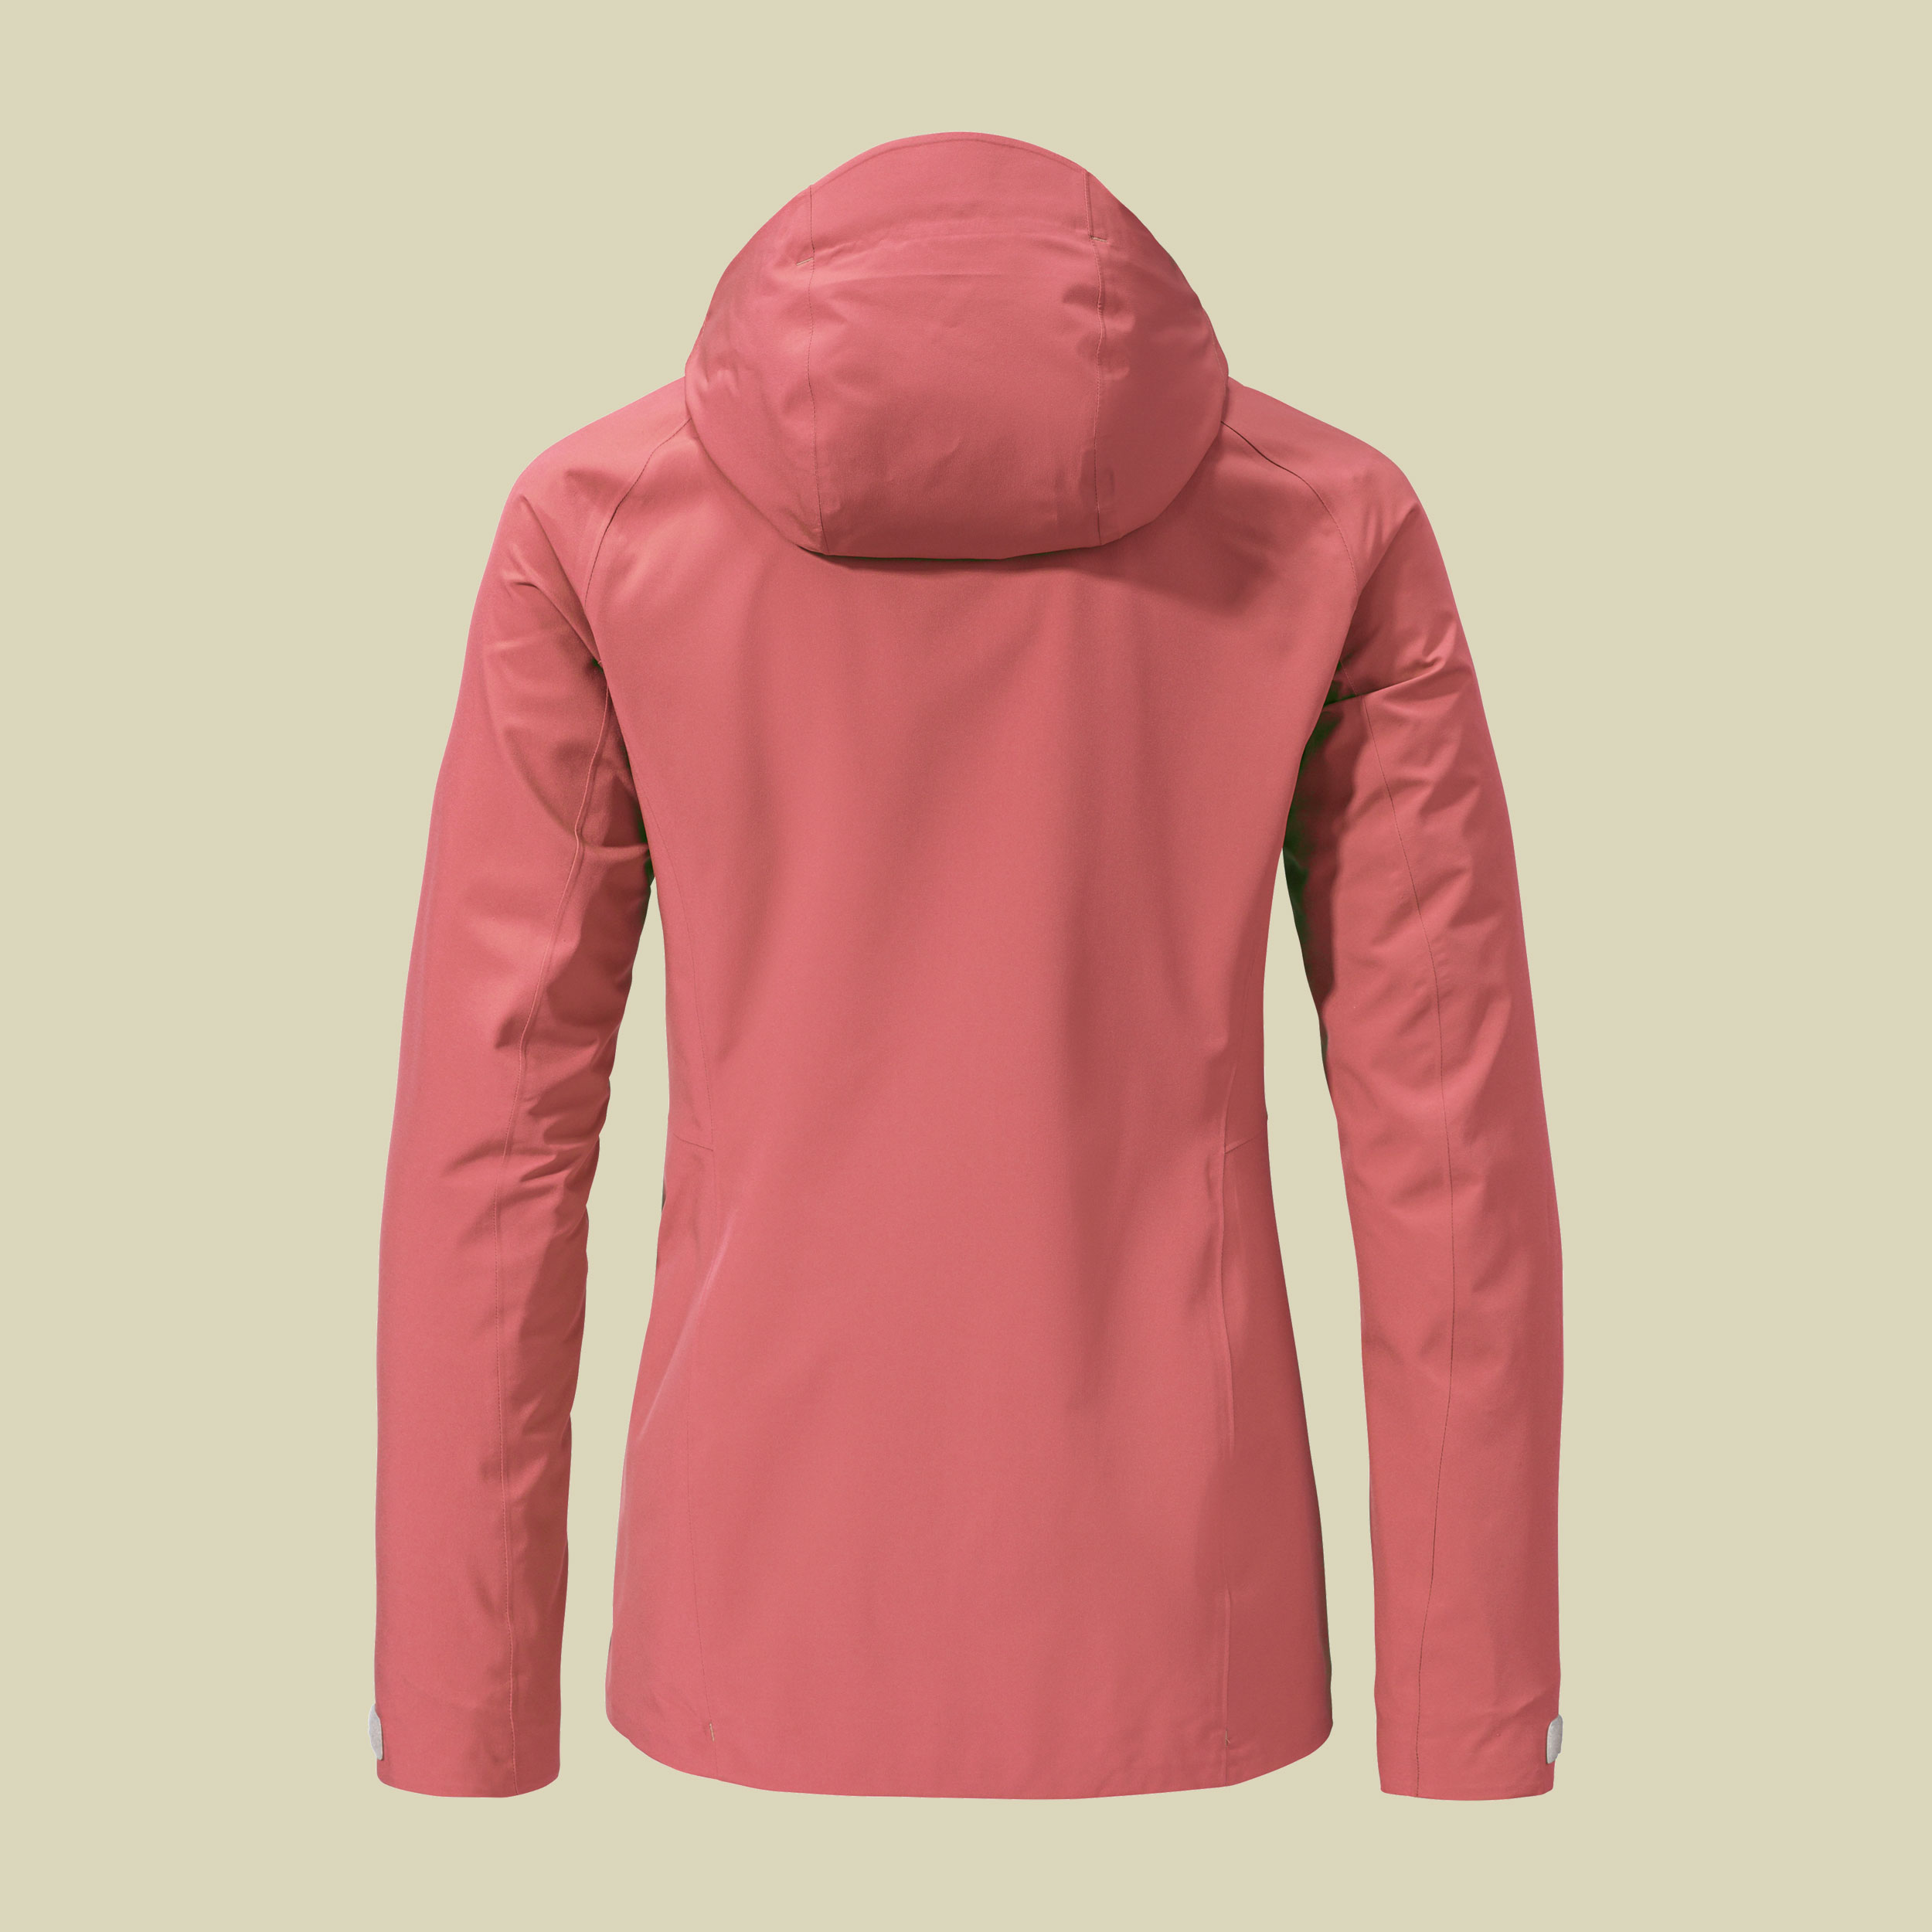 2L Jacket Ankelspitz L Women 46 pink - clasping rose